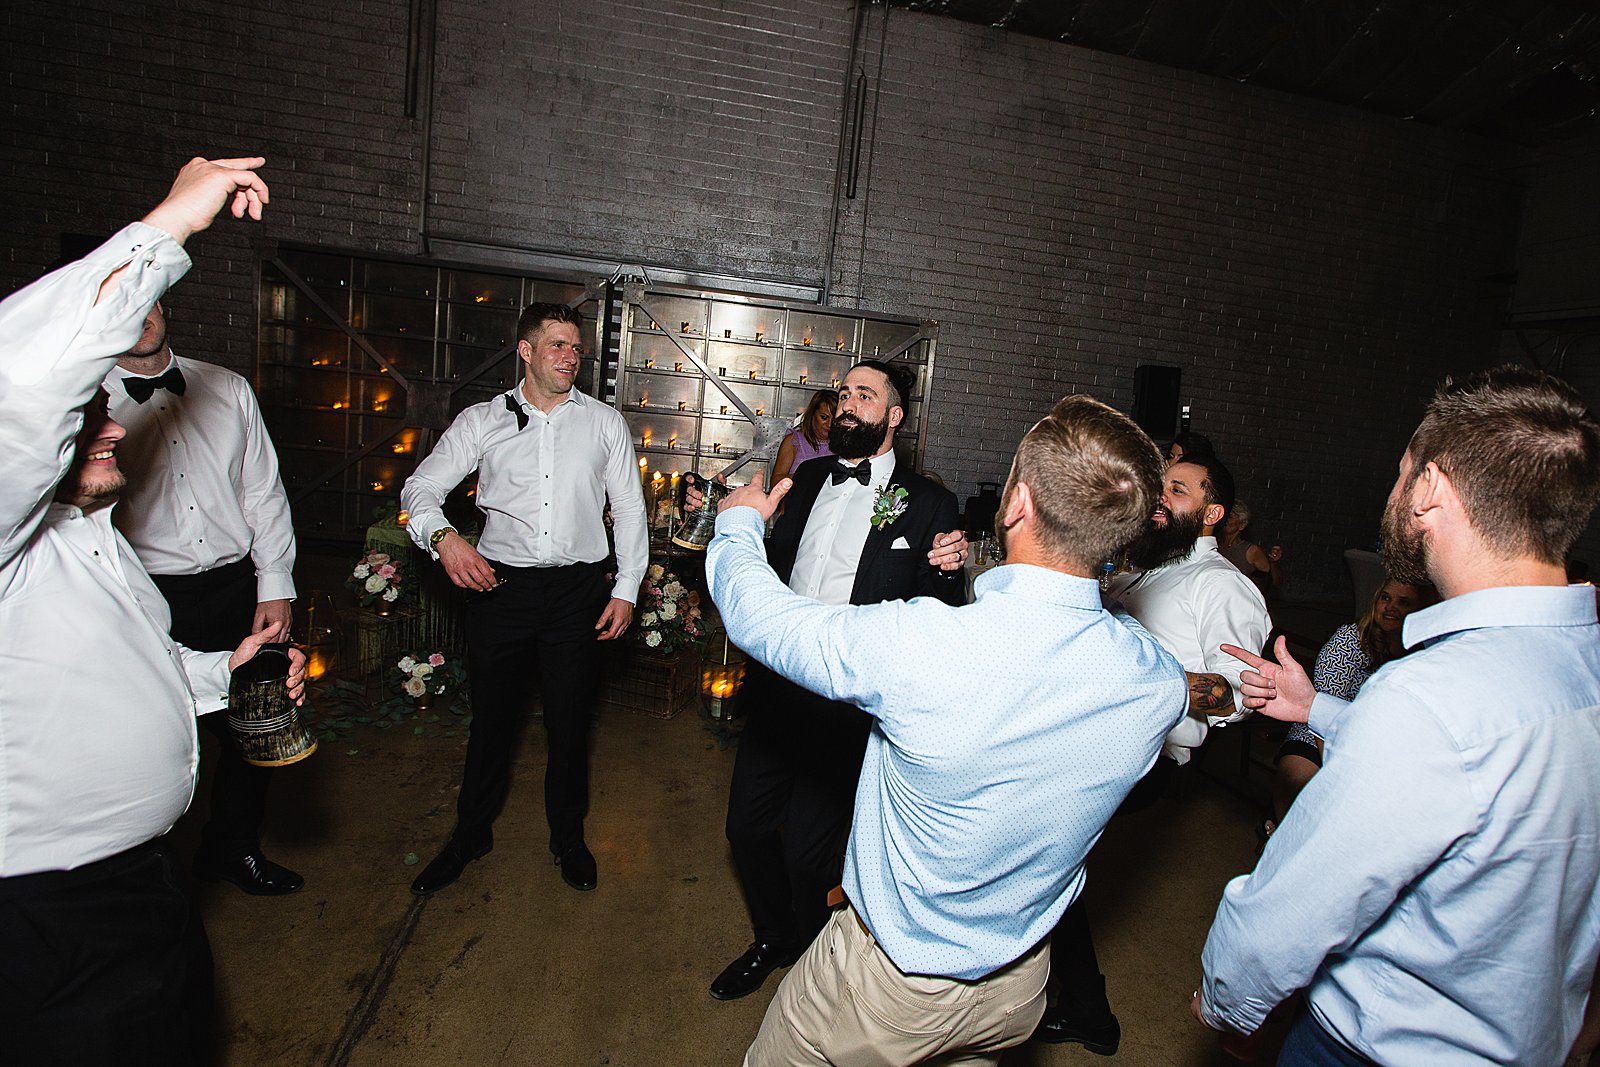 Groom dancing with guests at The Ice House wedding reception by Phoenix wedding photographer PMA Photography